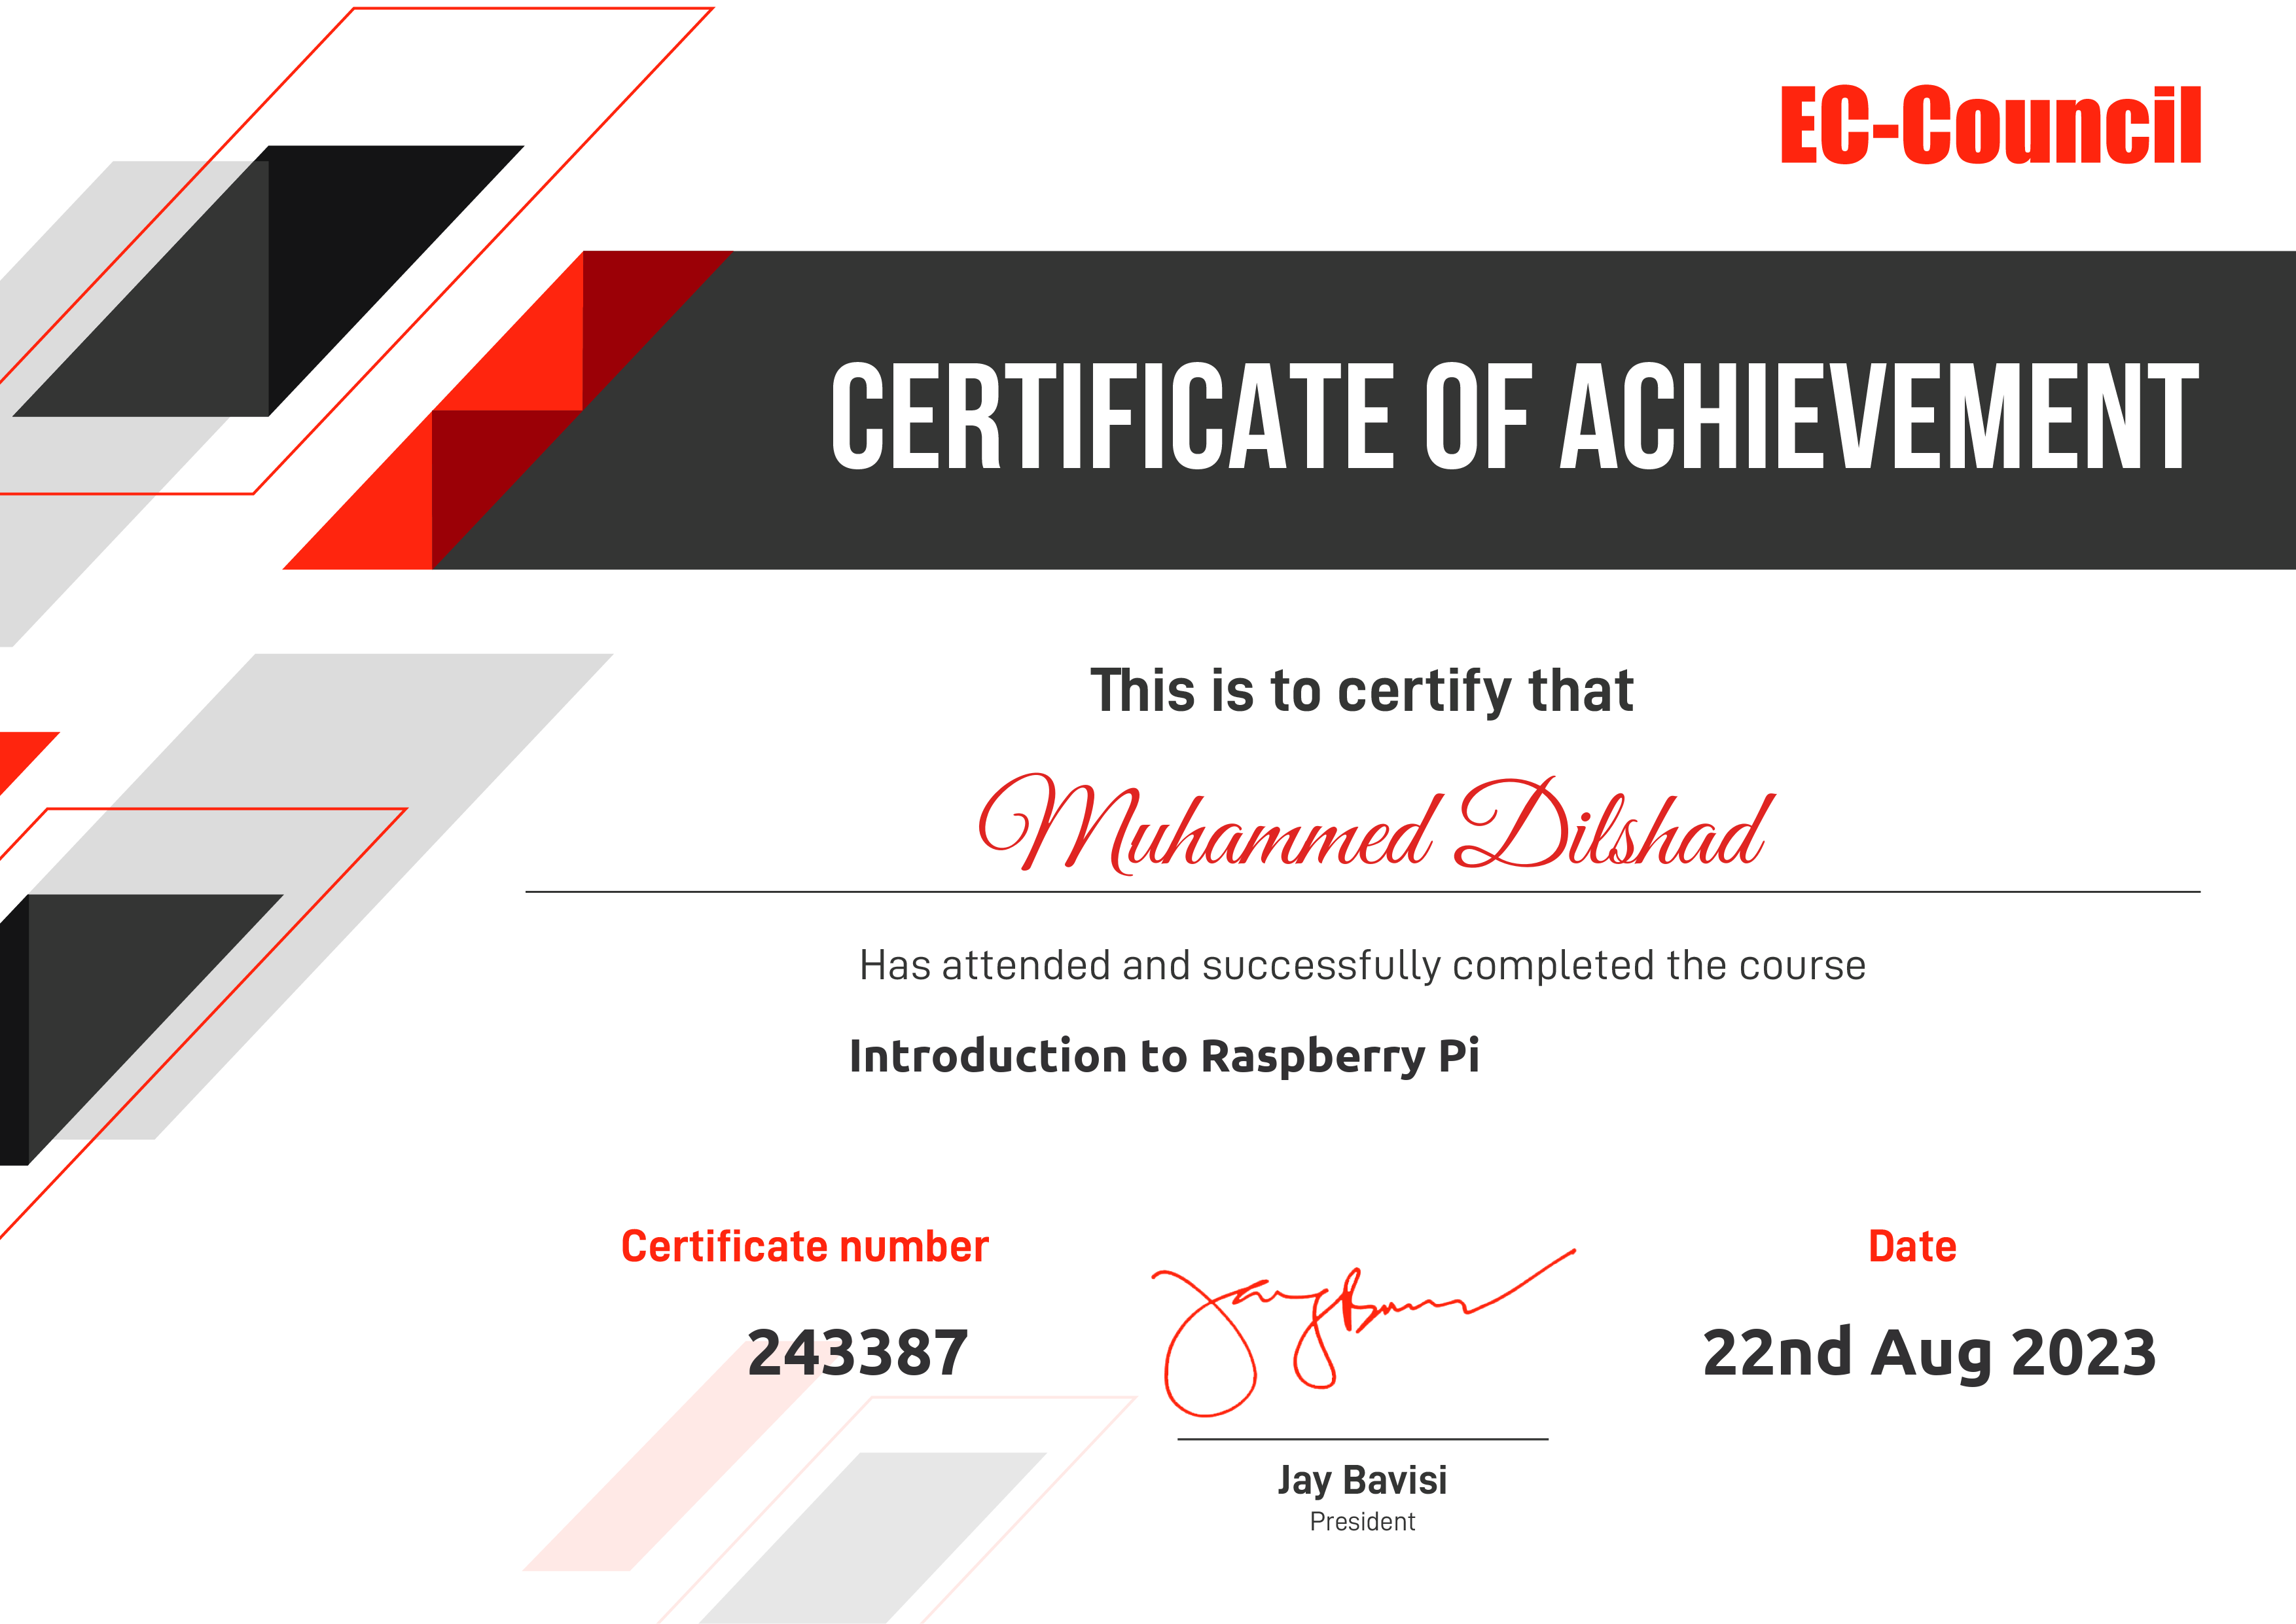 yy CERTIFICATE OF ACHIEVEMENT

This is to certify that

4 C)Vlutammed EDilshad

Has attended and successfully completed the course
Introduction to Raspberry Pi

Certificate number Date
243387 SE 22nd Aug 2023

Jay Bavisi

President